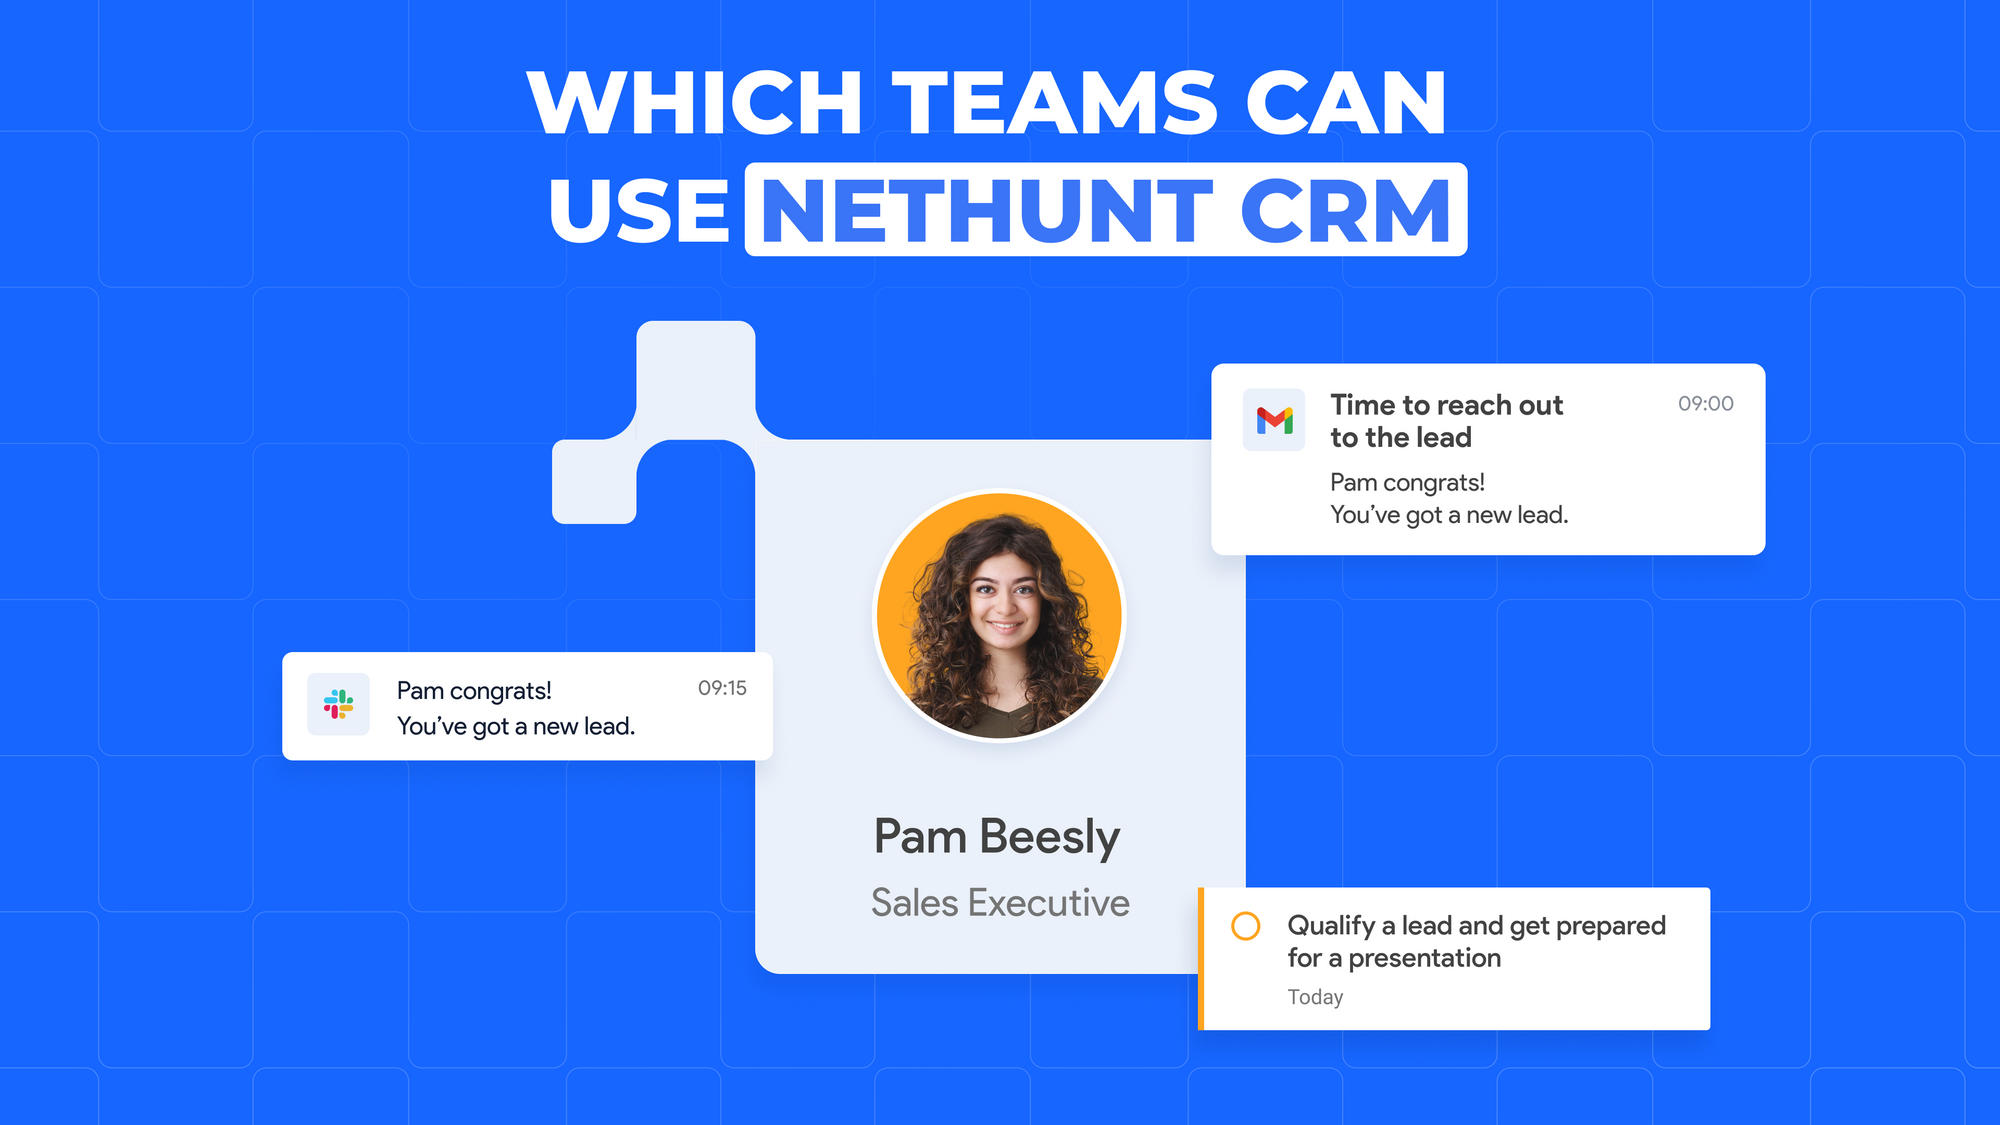 Not just for sales: Which teams can use NetHunt CRM?